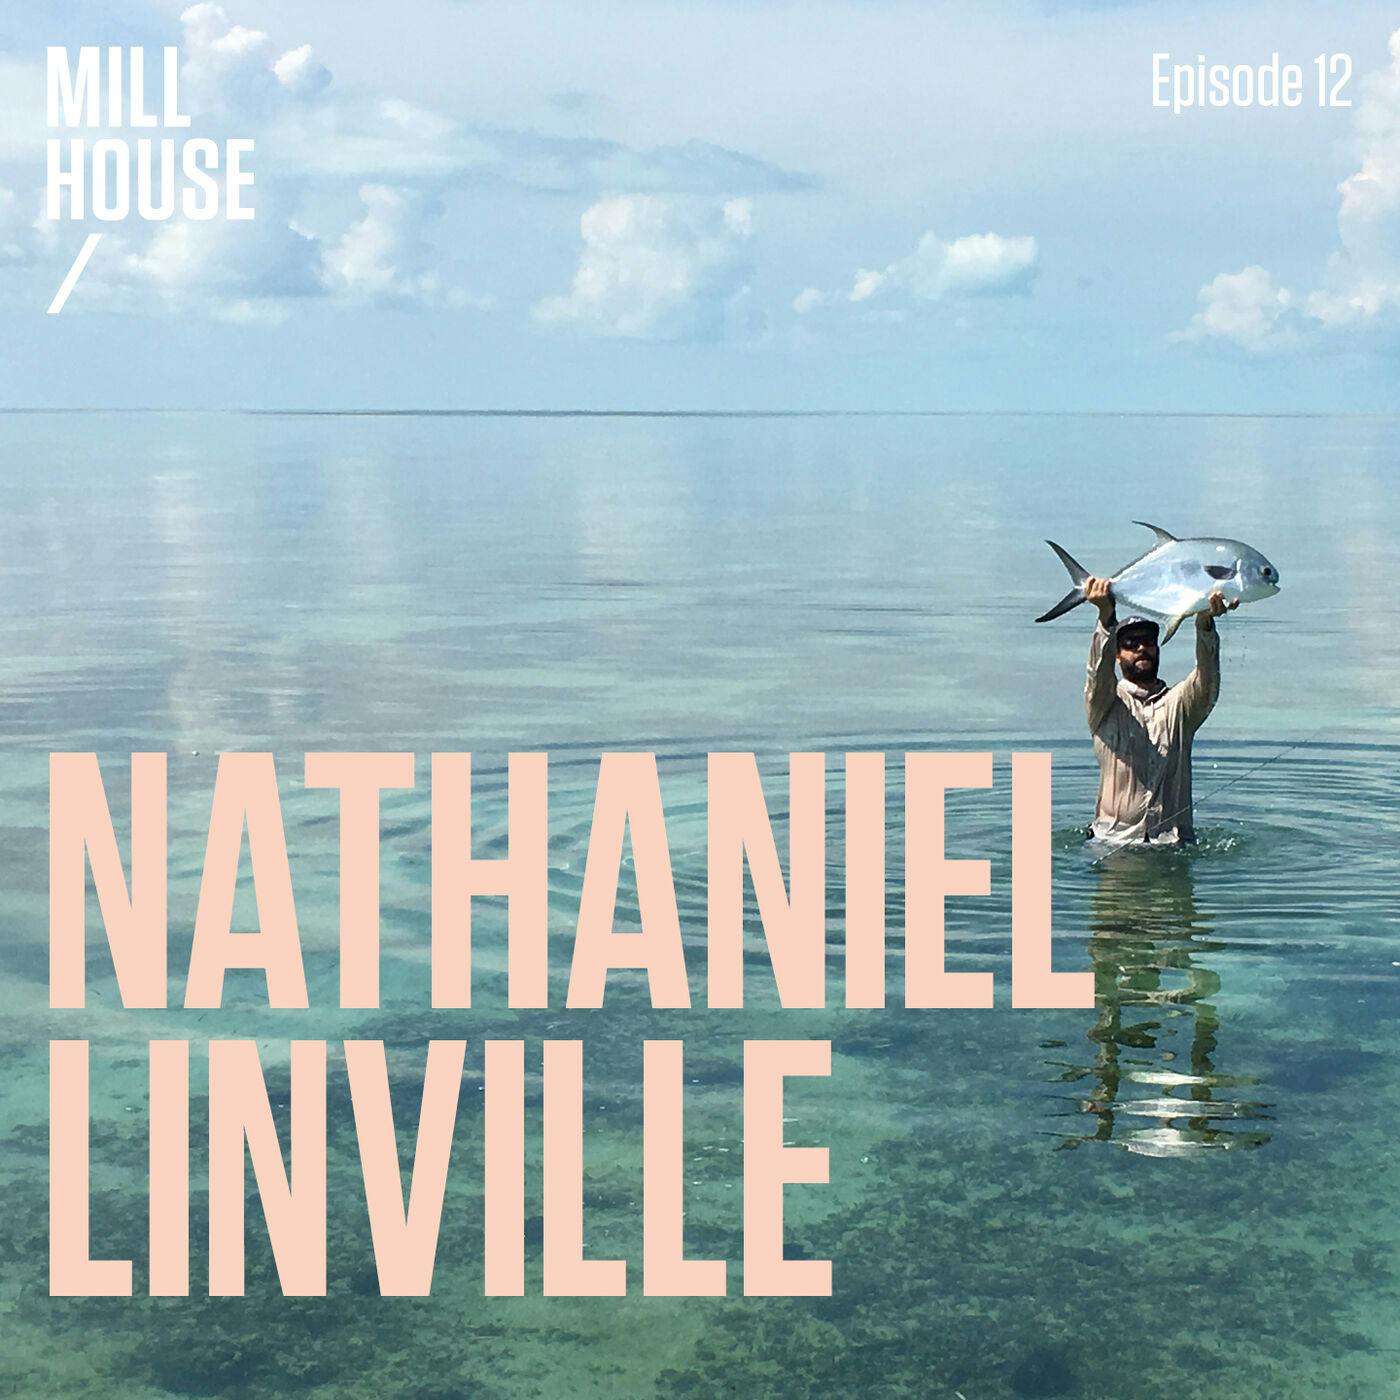 Episode 12: Nathaniel Linville - Angling Genius